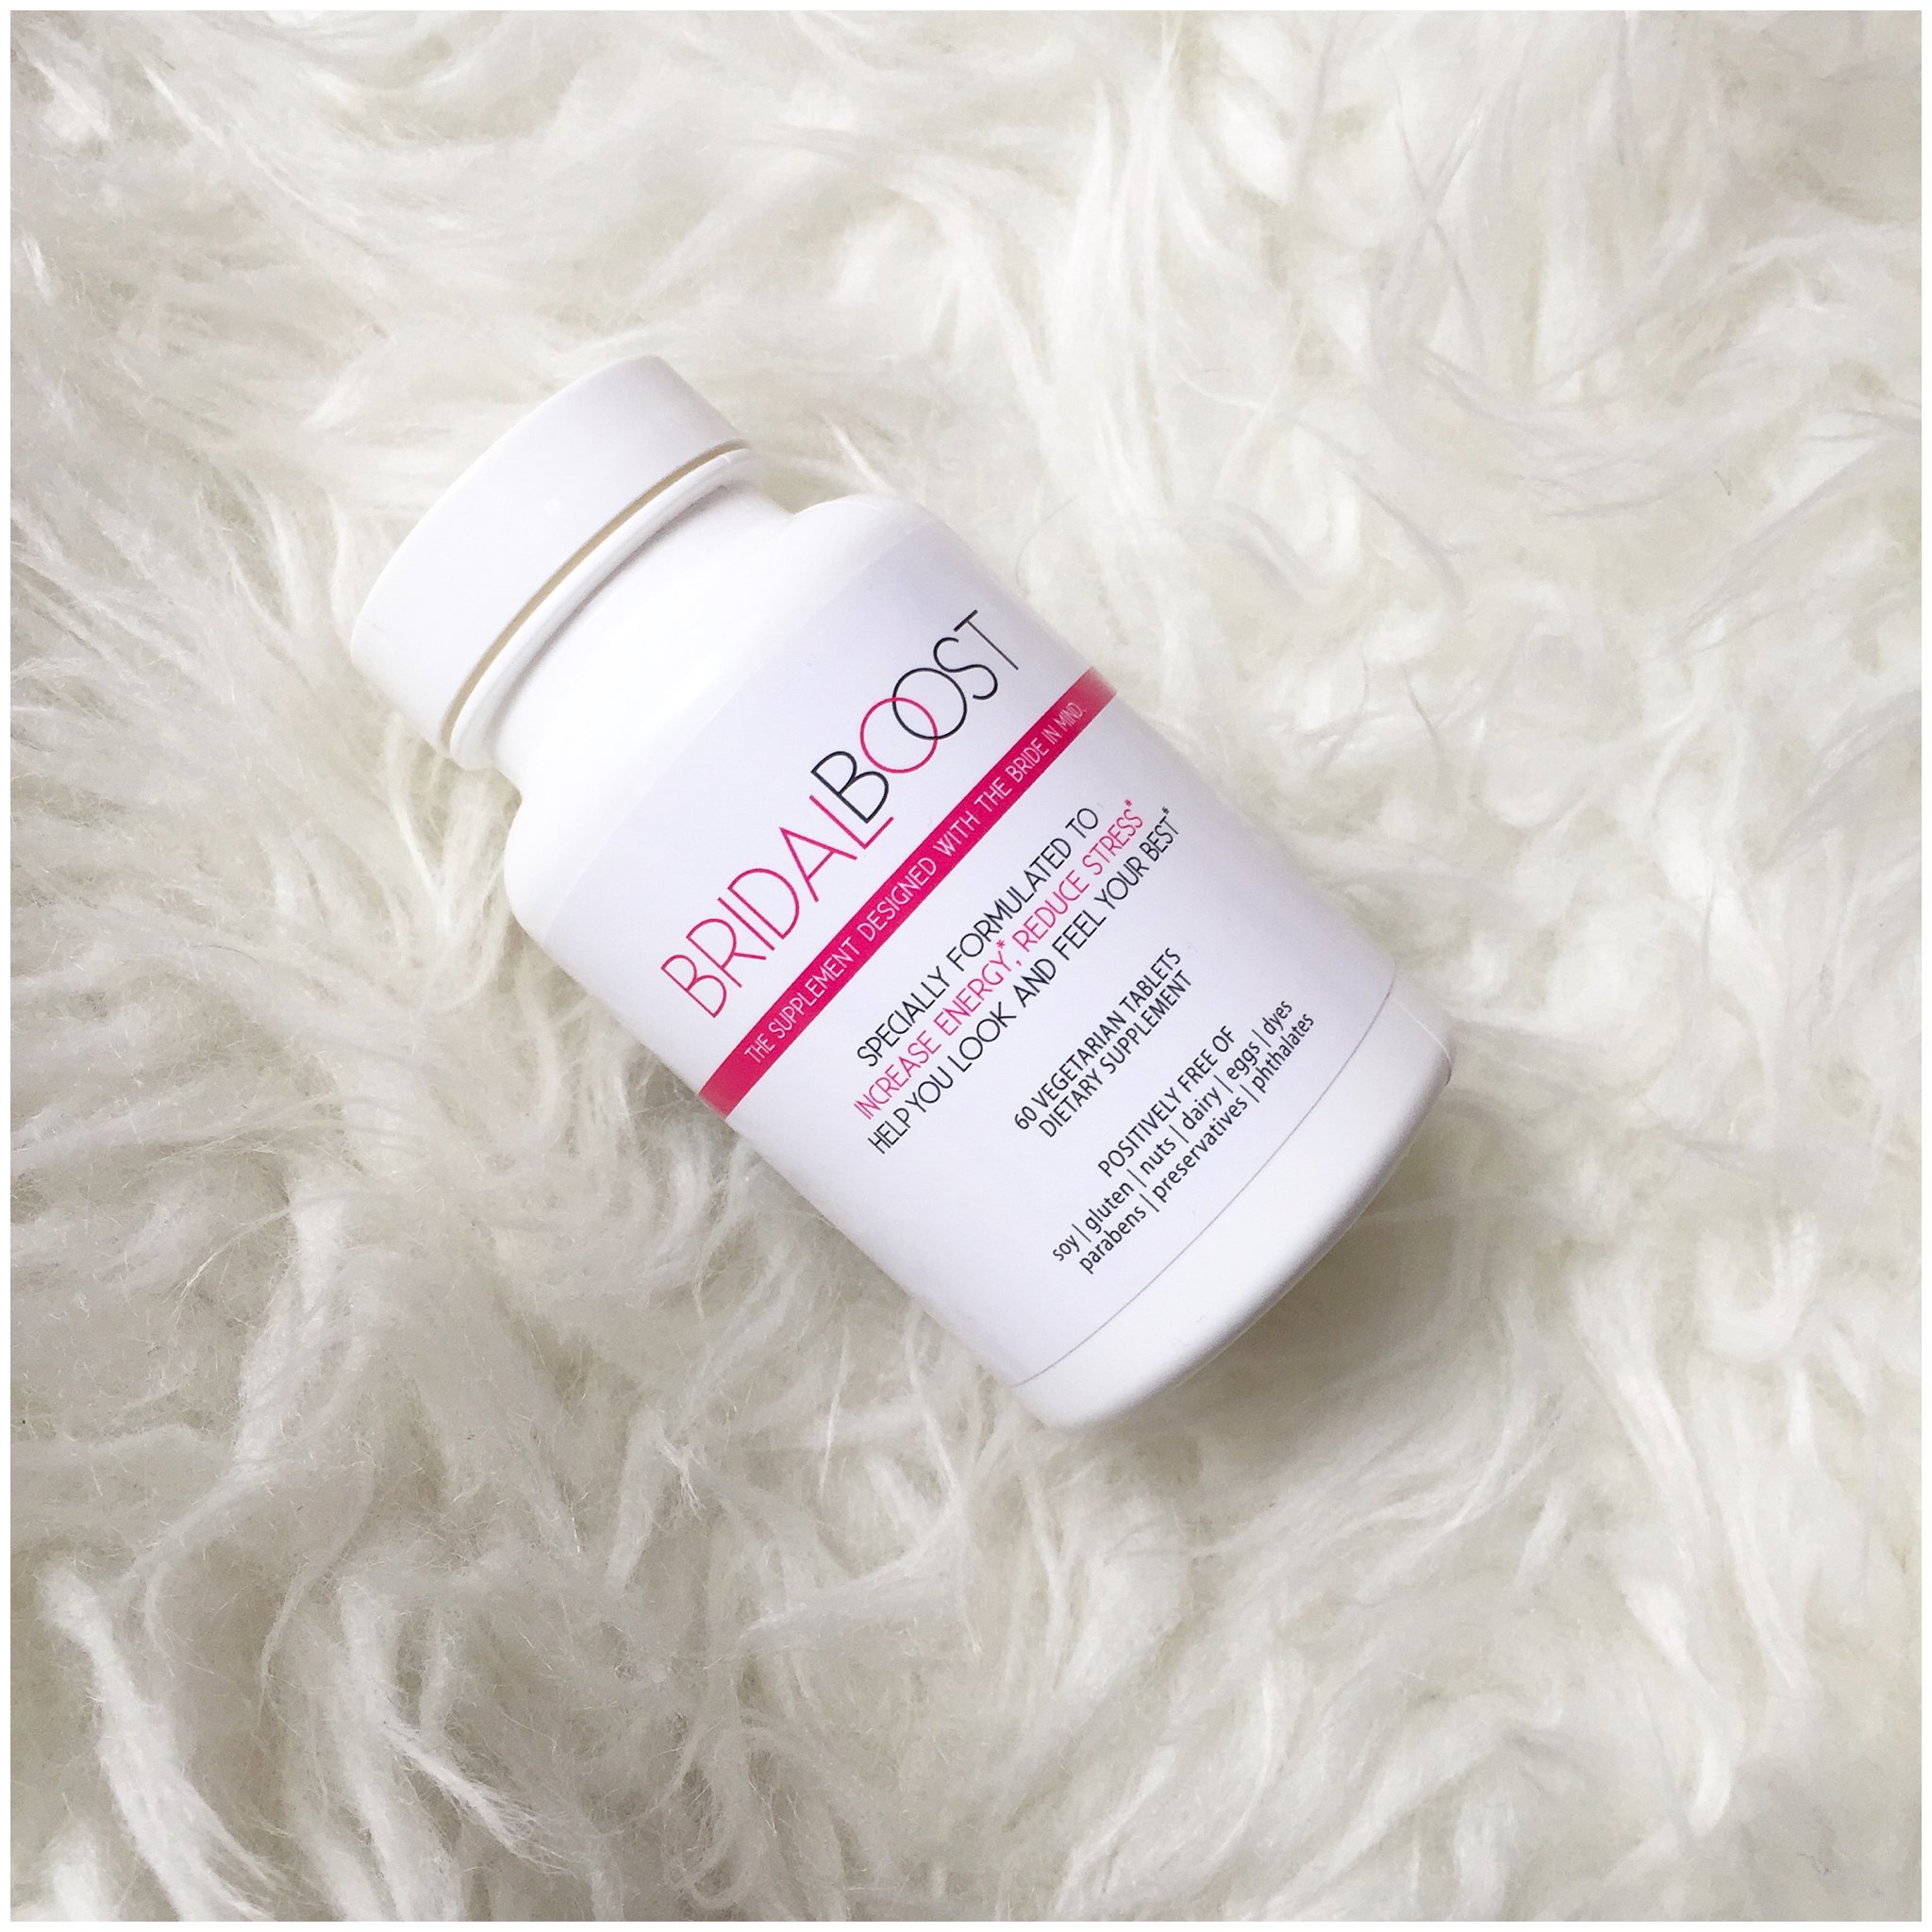 Bridal Boost Vitamin Supplement - Laura Lee Photography